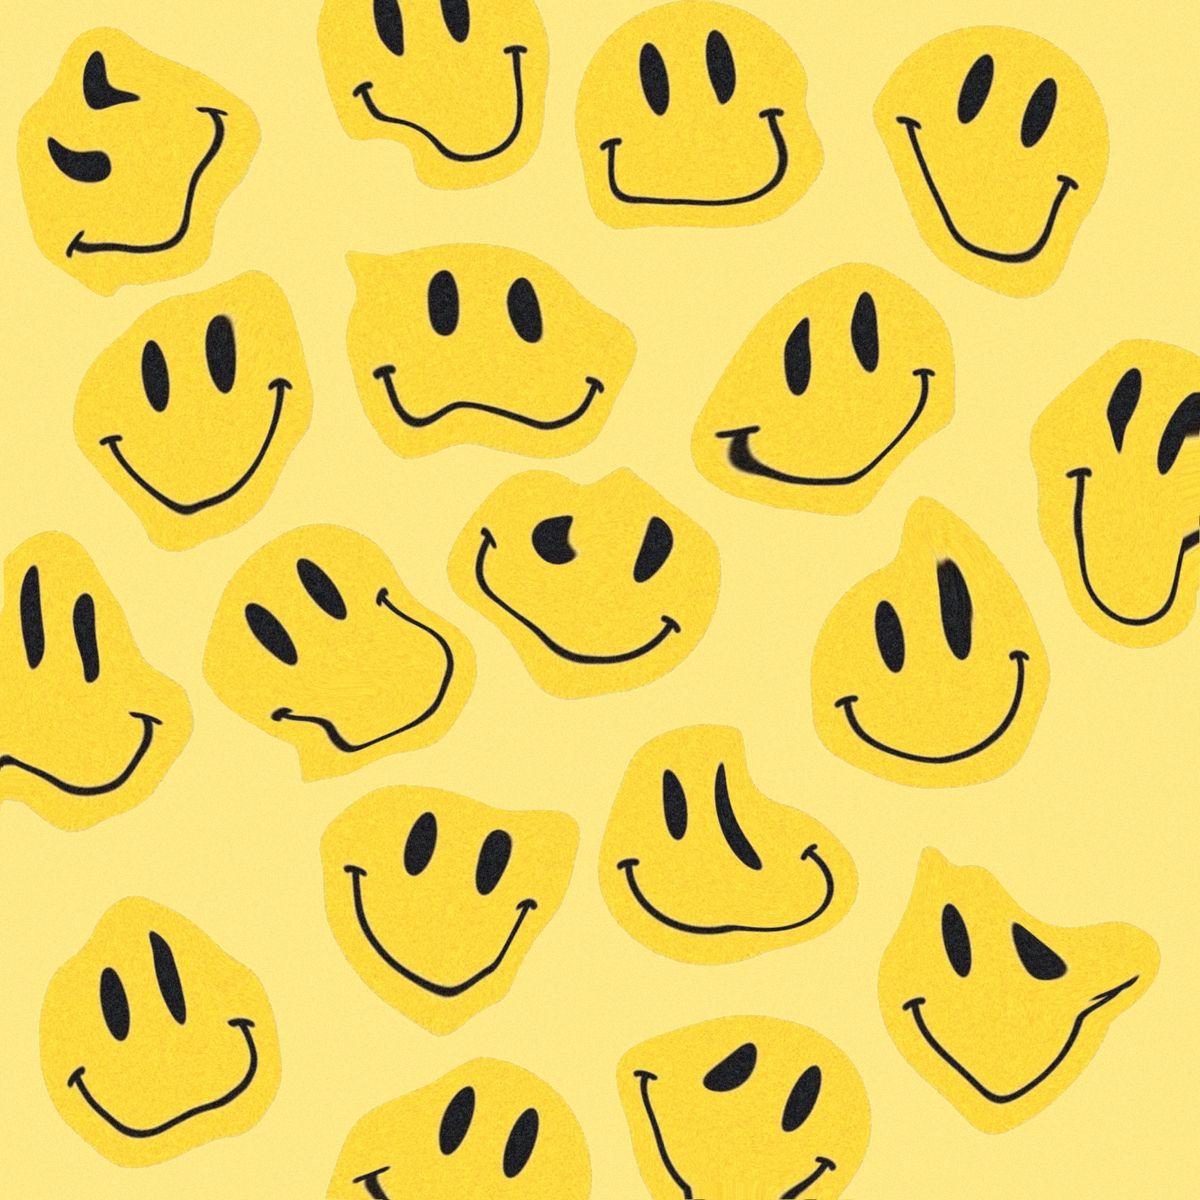 Smiley Balloons Live Wallpaper: A Bright and Playful Design - free download